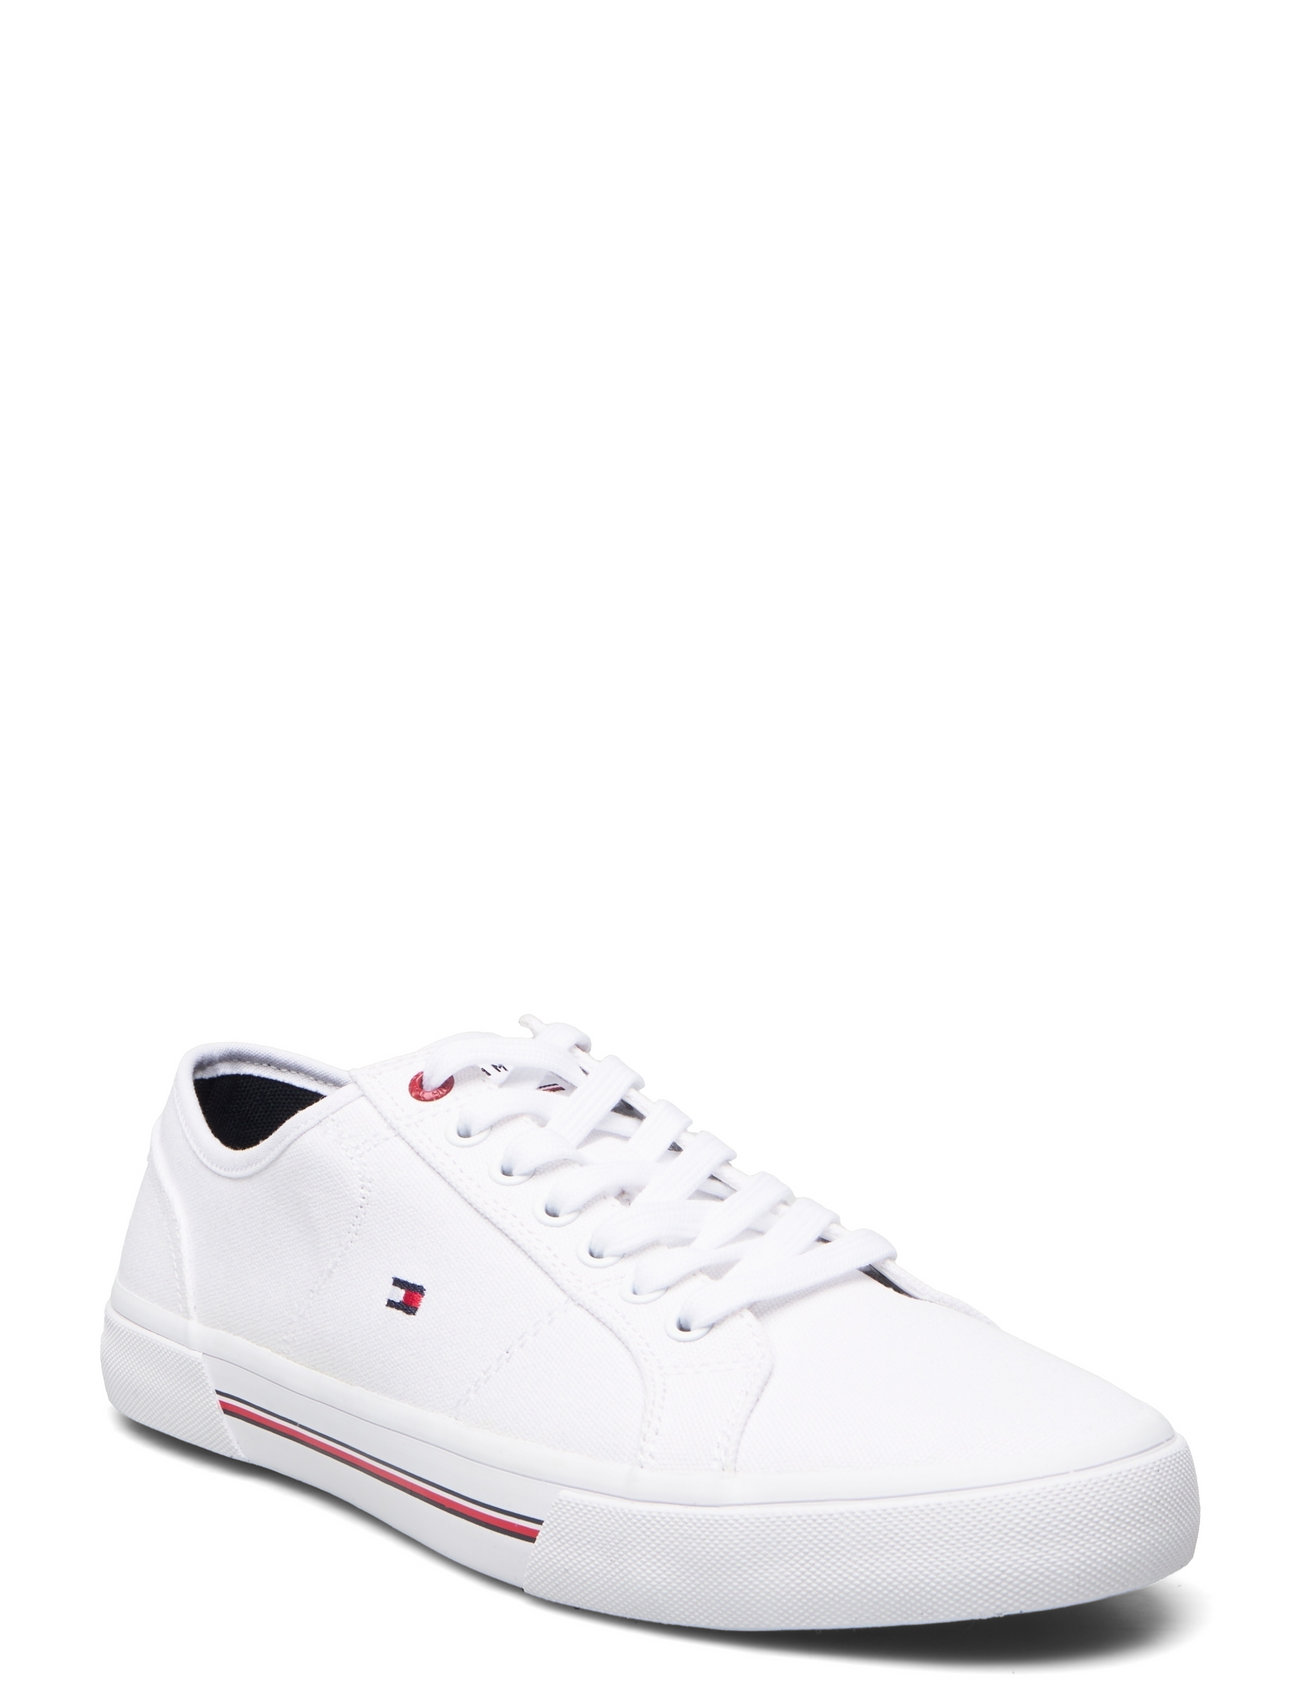 Core Corporate Vulc Canvas Low-top Sneakers White Tommy Hilfiger